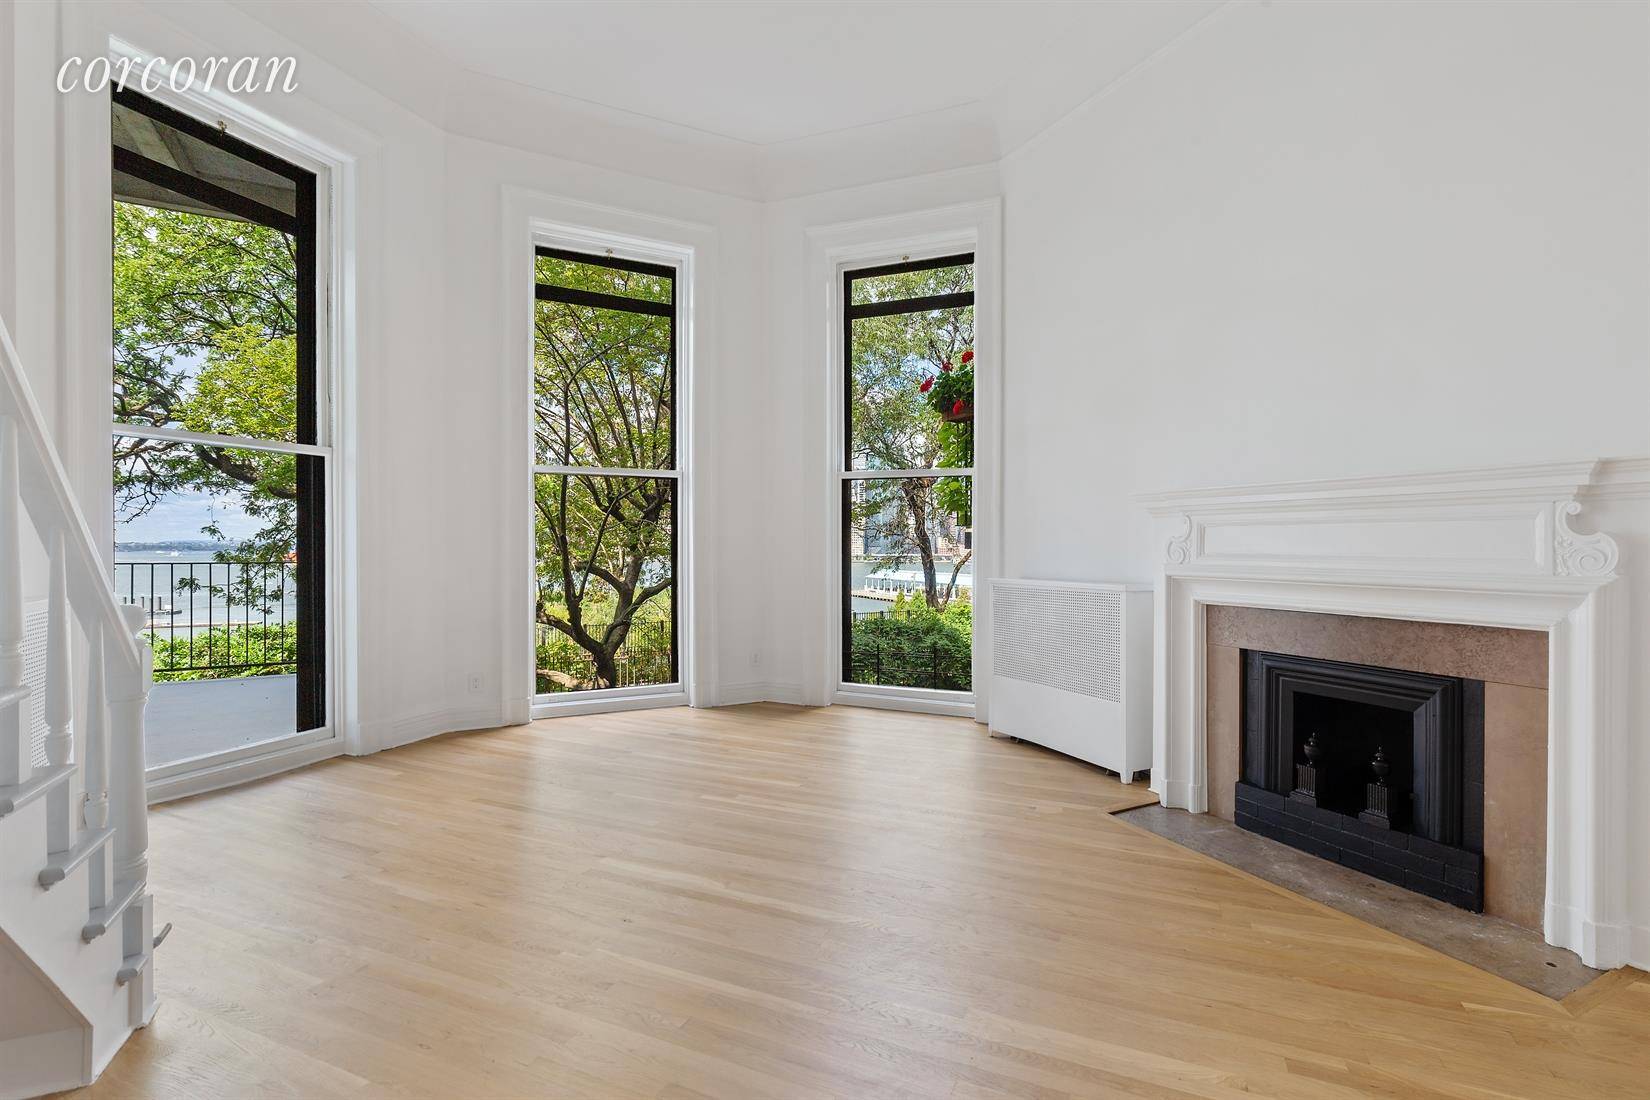 ELEGANT PARLOR FLOOR WITH BEST VIEWS ON MOST CHIC STREET IN THE HEIGHTSSPECTACULAR VIEWS of the New York Harbor and the Manhattan skyline from a HUGE 280 sq ft TERRACE.